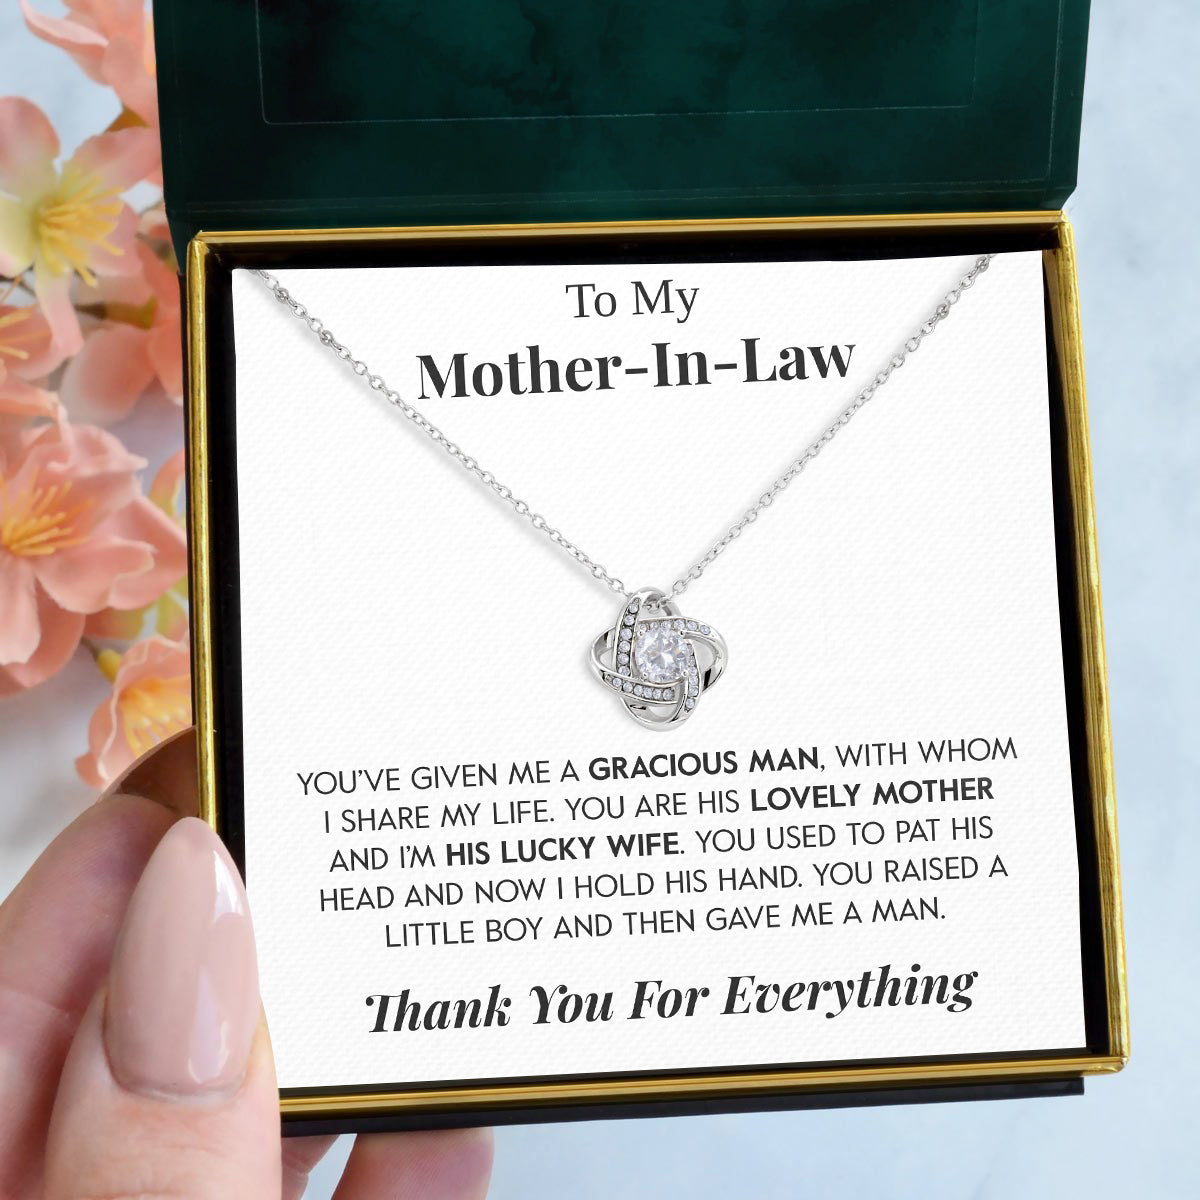 To My Mother-in-Law | "Thank You For Everything" | Love Knot Necklace